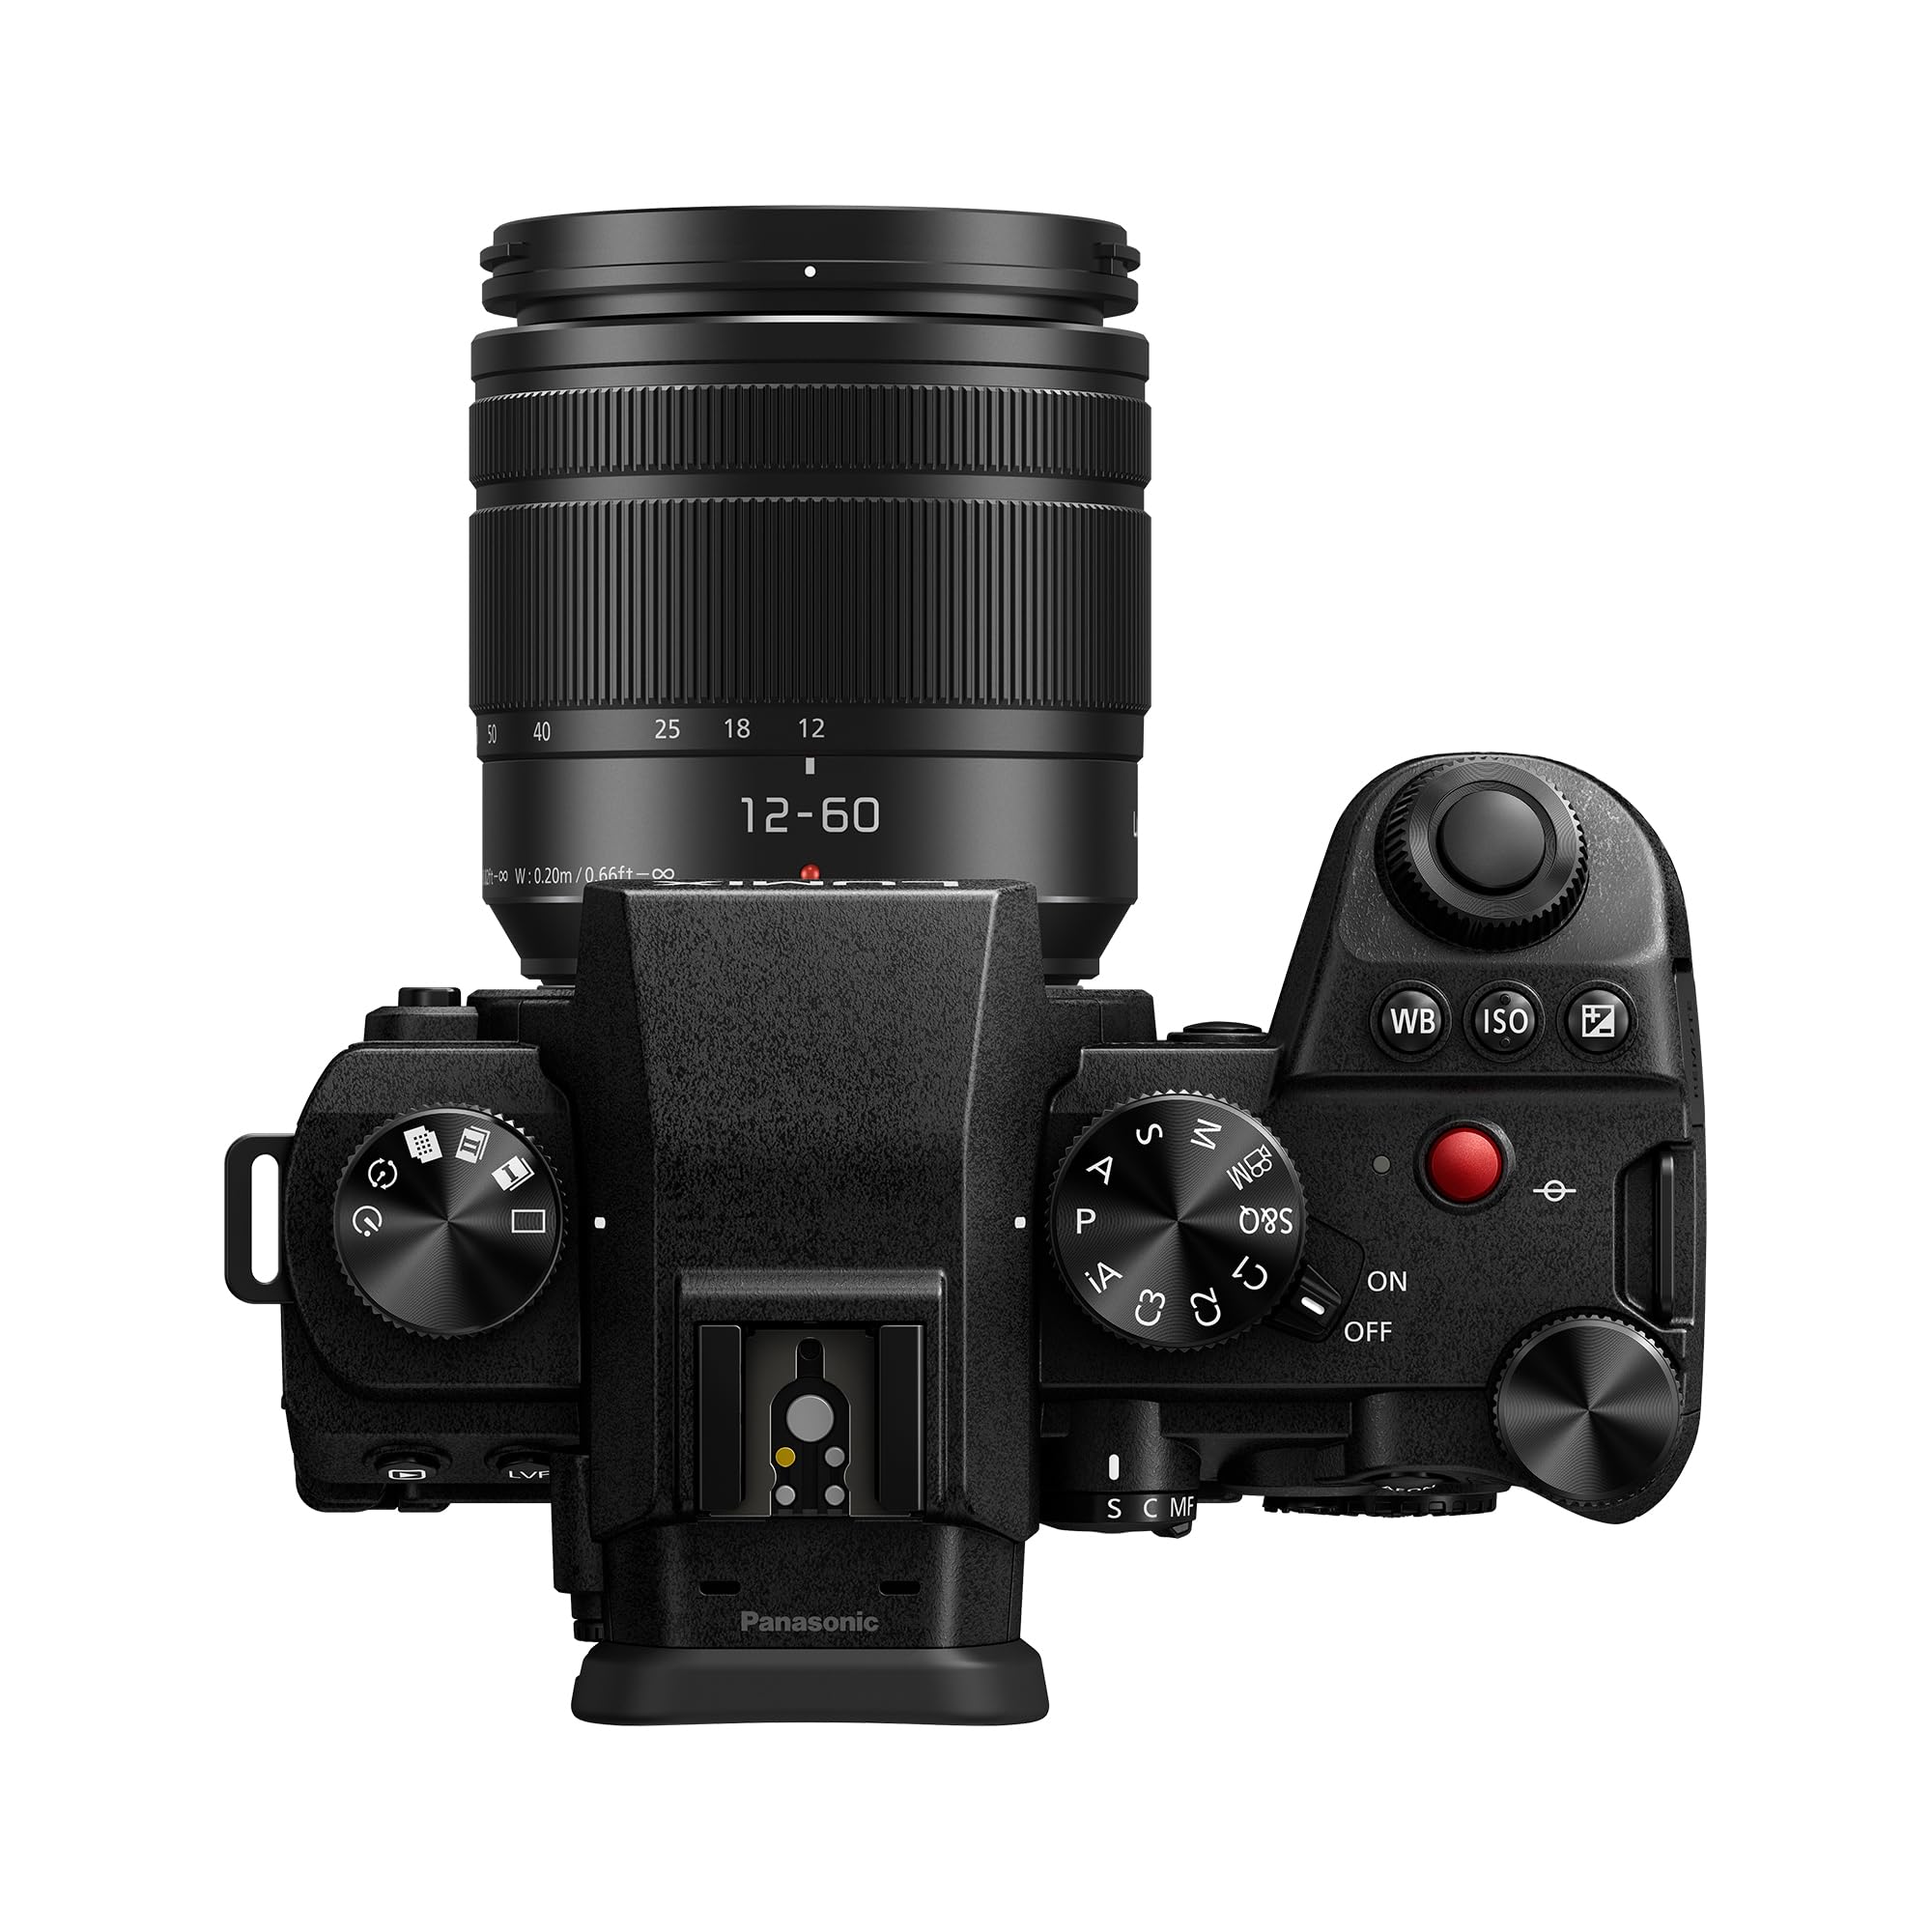 Panasonic LUMIX G9II Micro Four Thirds Camera, 25.2MP Sensor with Phase Hybrid AF, Powerful Image Stabilization, High-Speed Perfomance and Mobility with 12-60mm F2.8-4.0 Lens - DC-G9M2LK